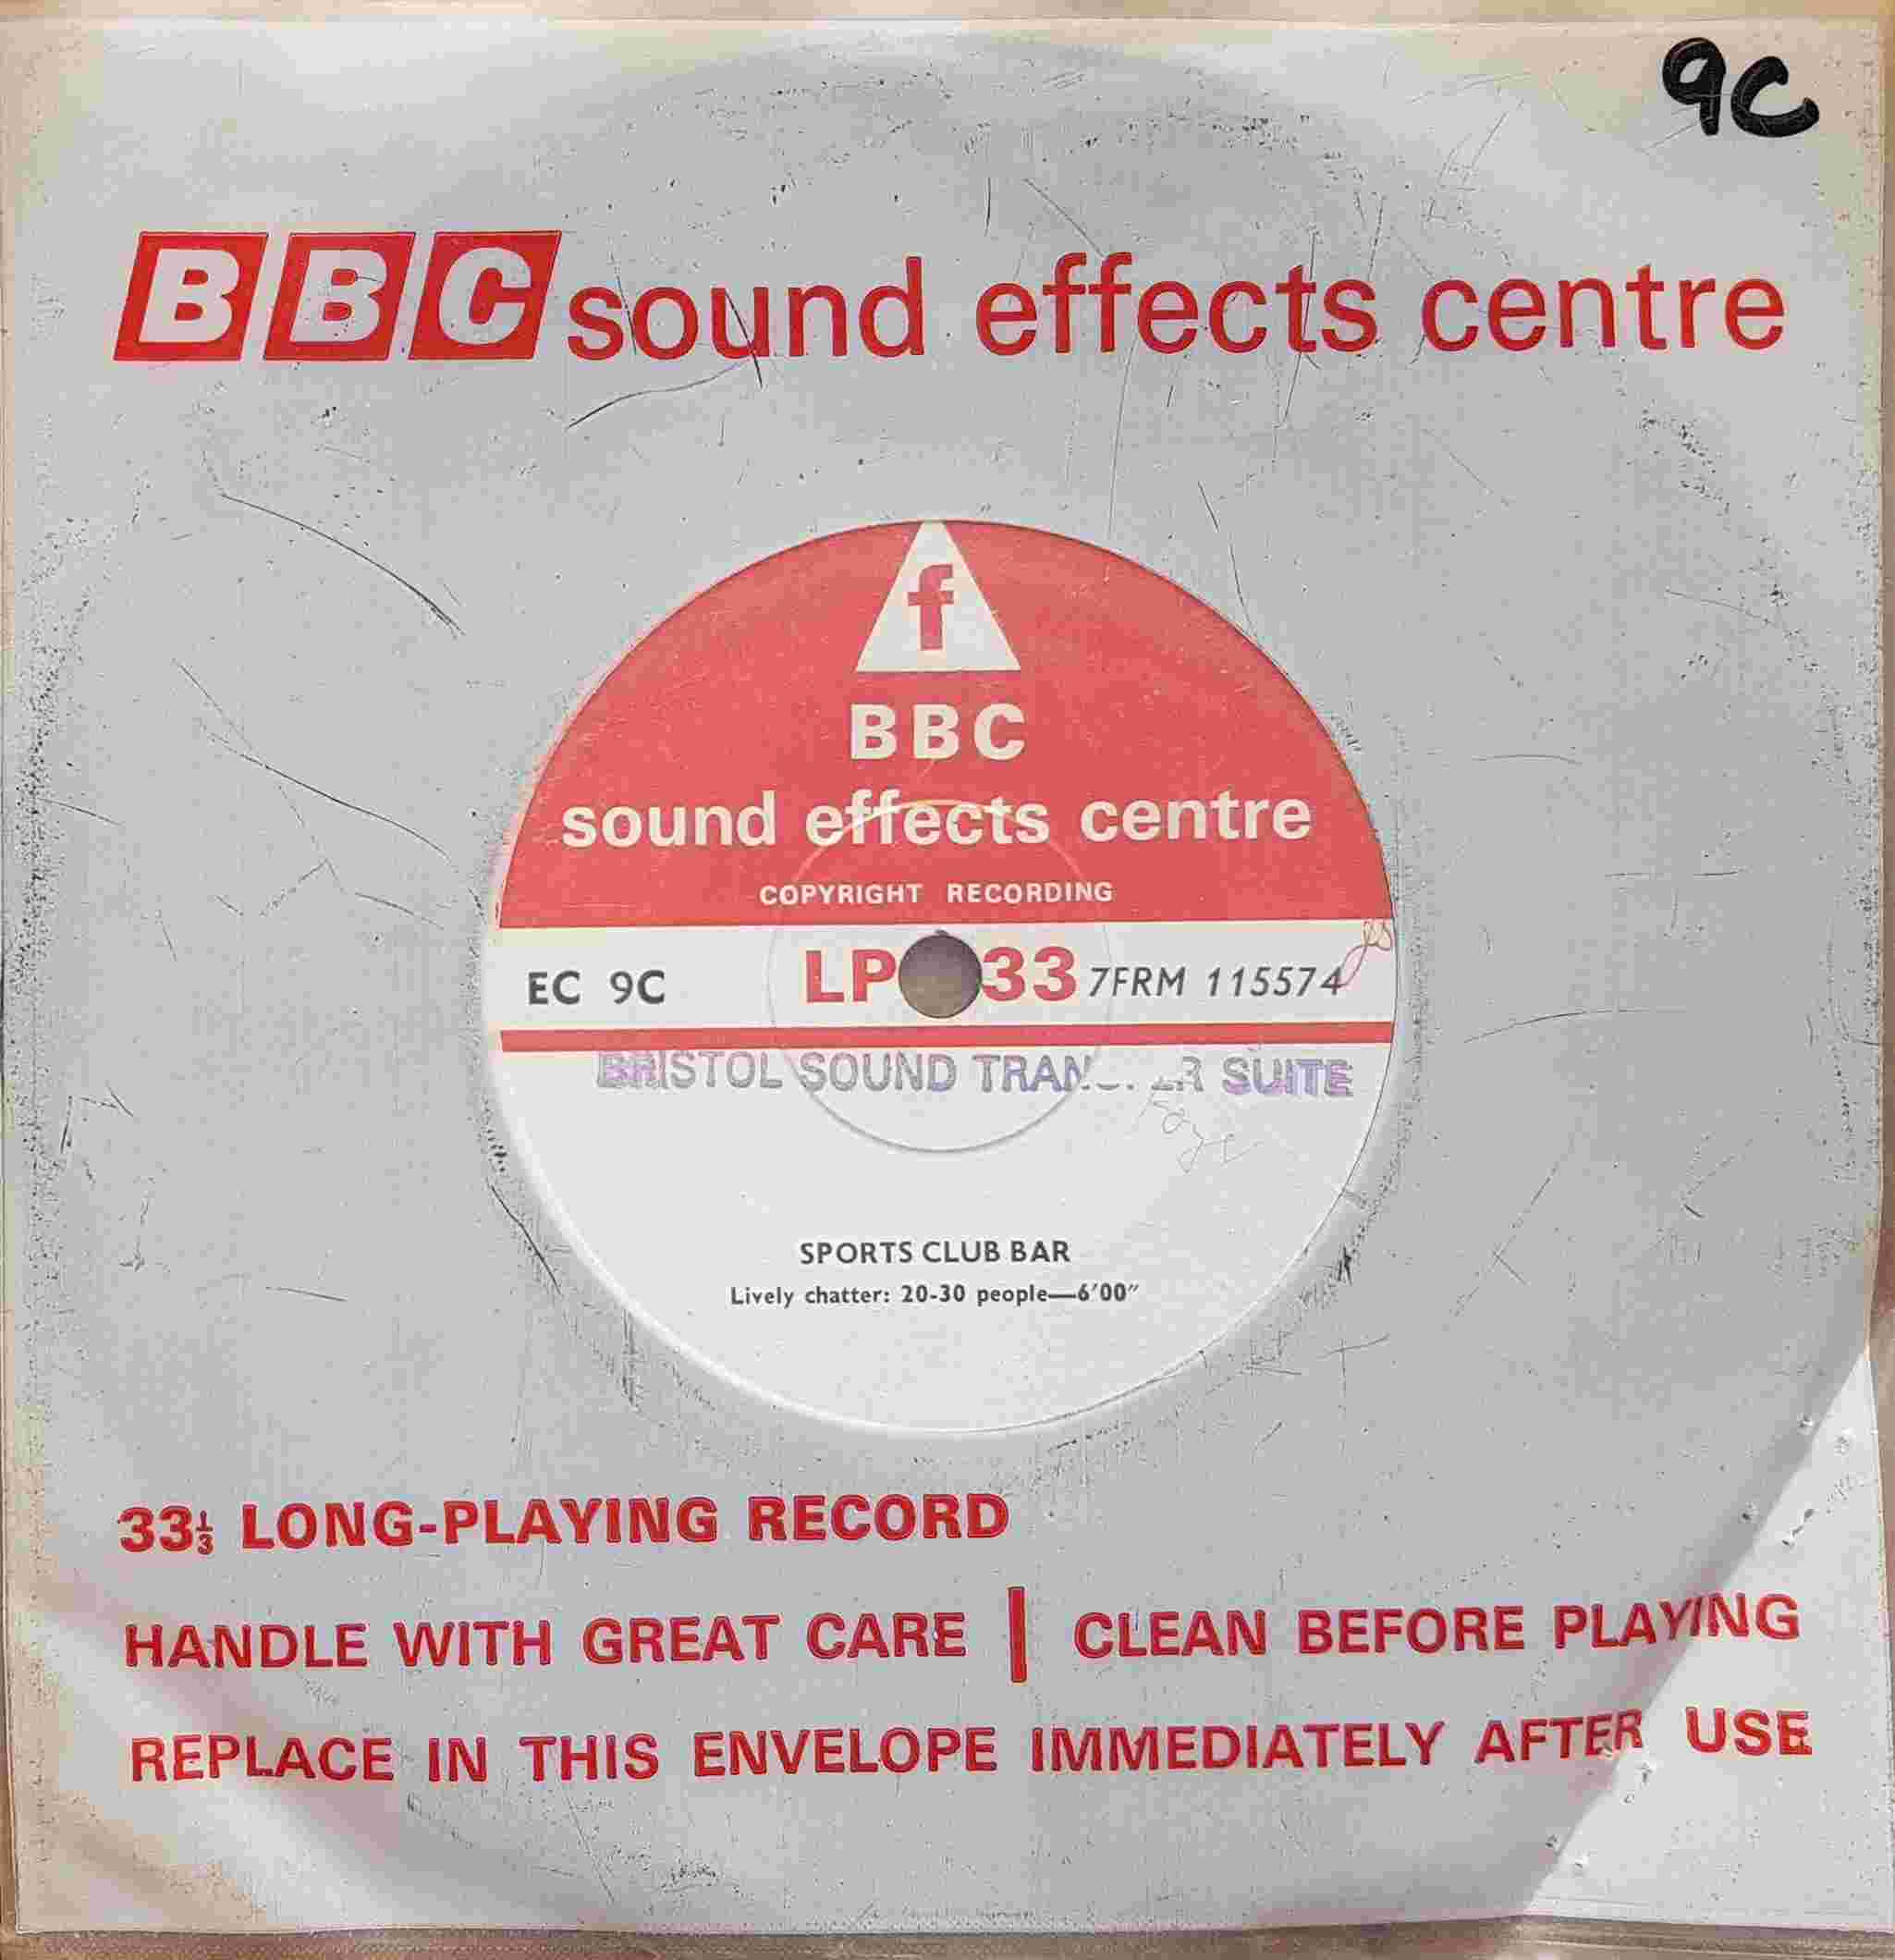 Picture of EC 9C Sports club bar by artist Not registered from the BBC singles - Records and Tapes library